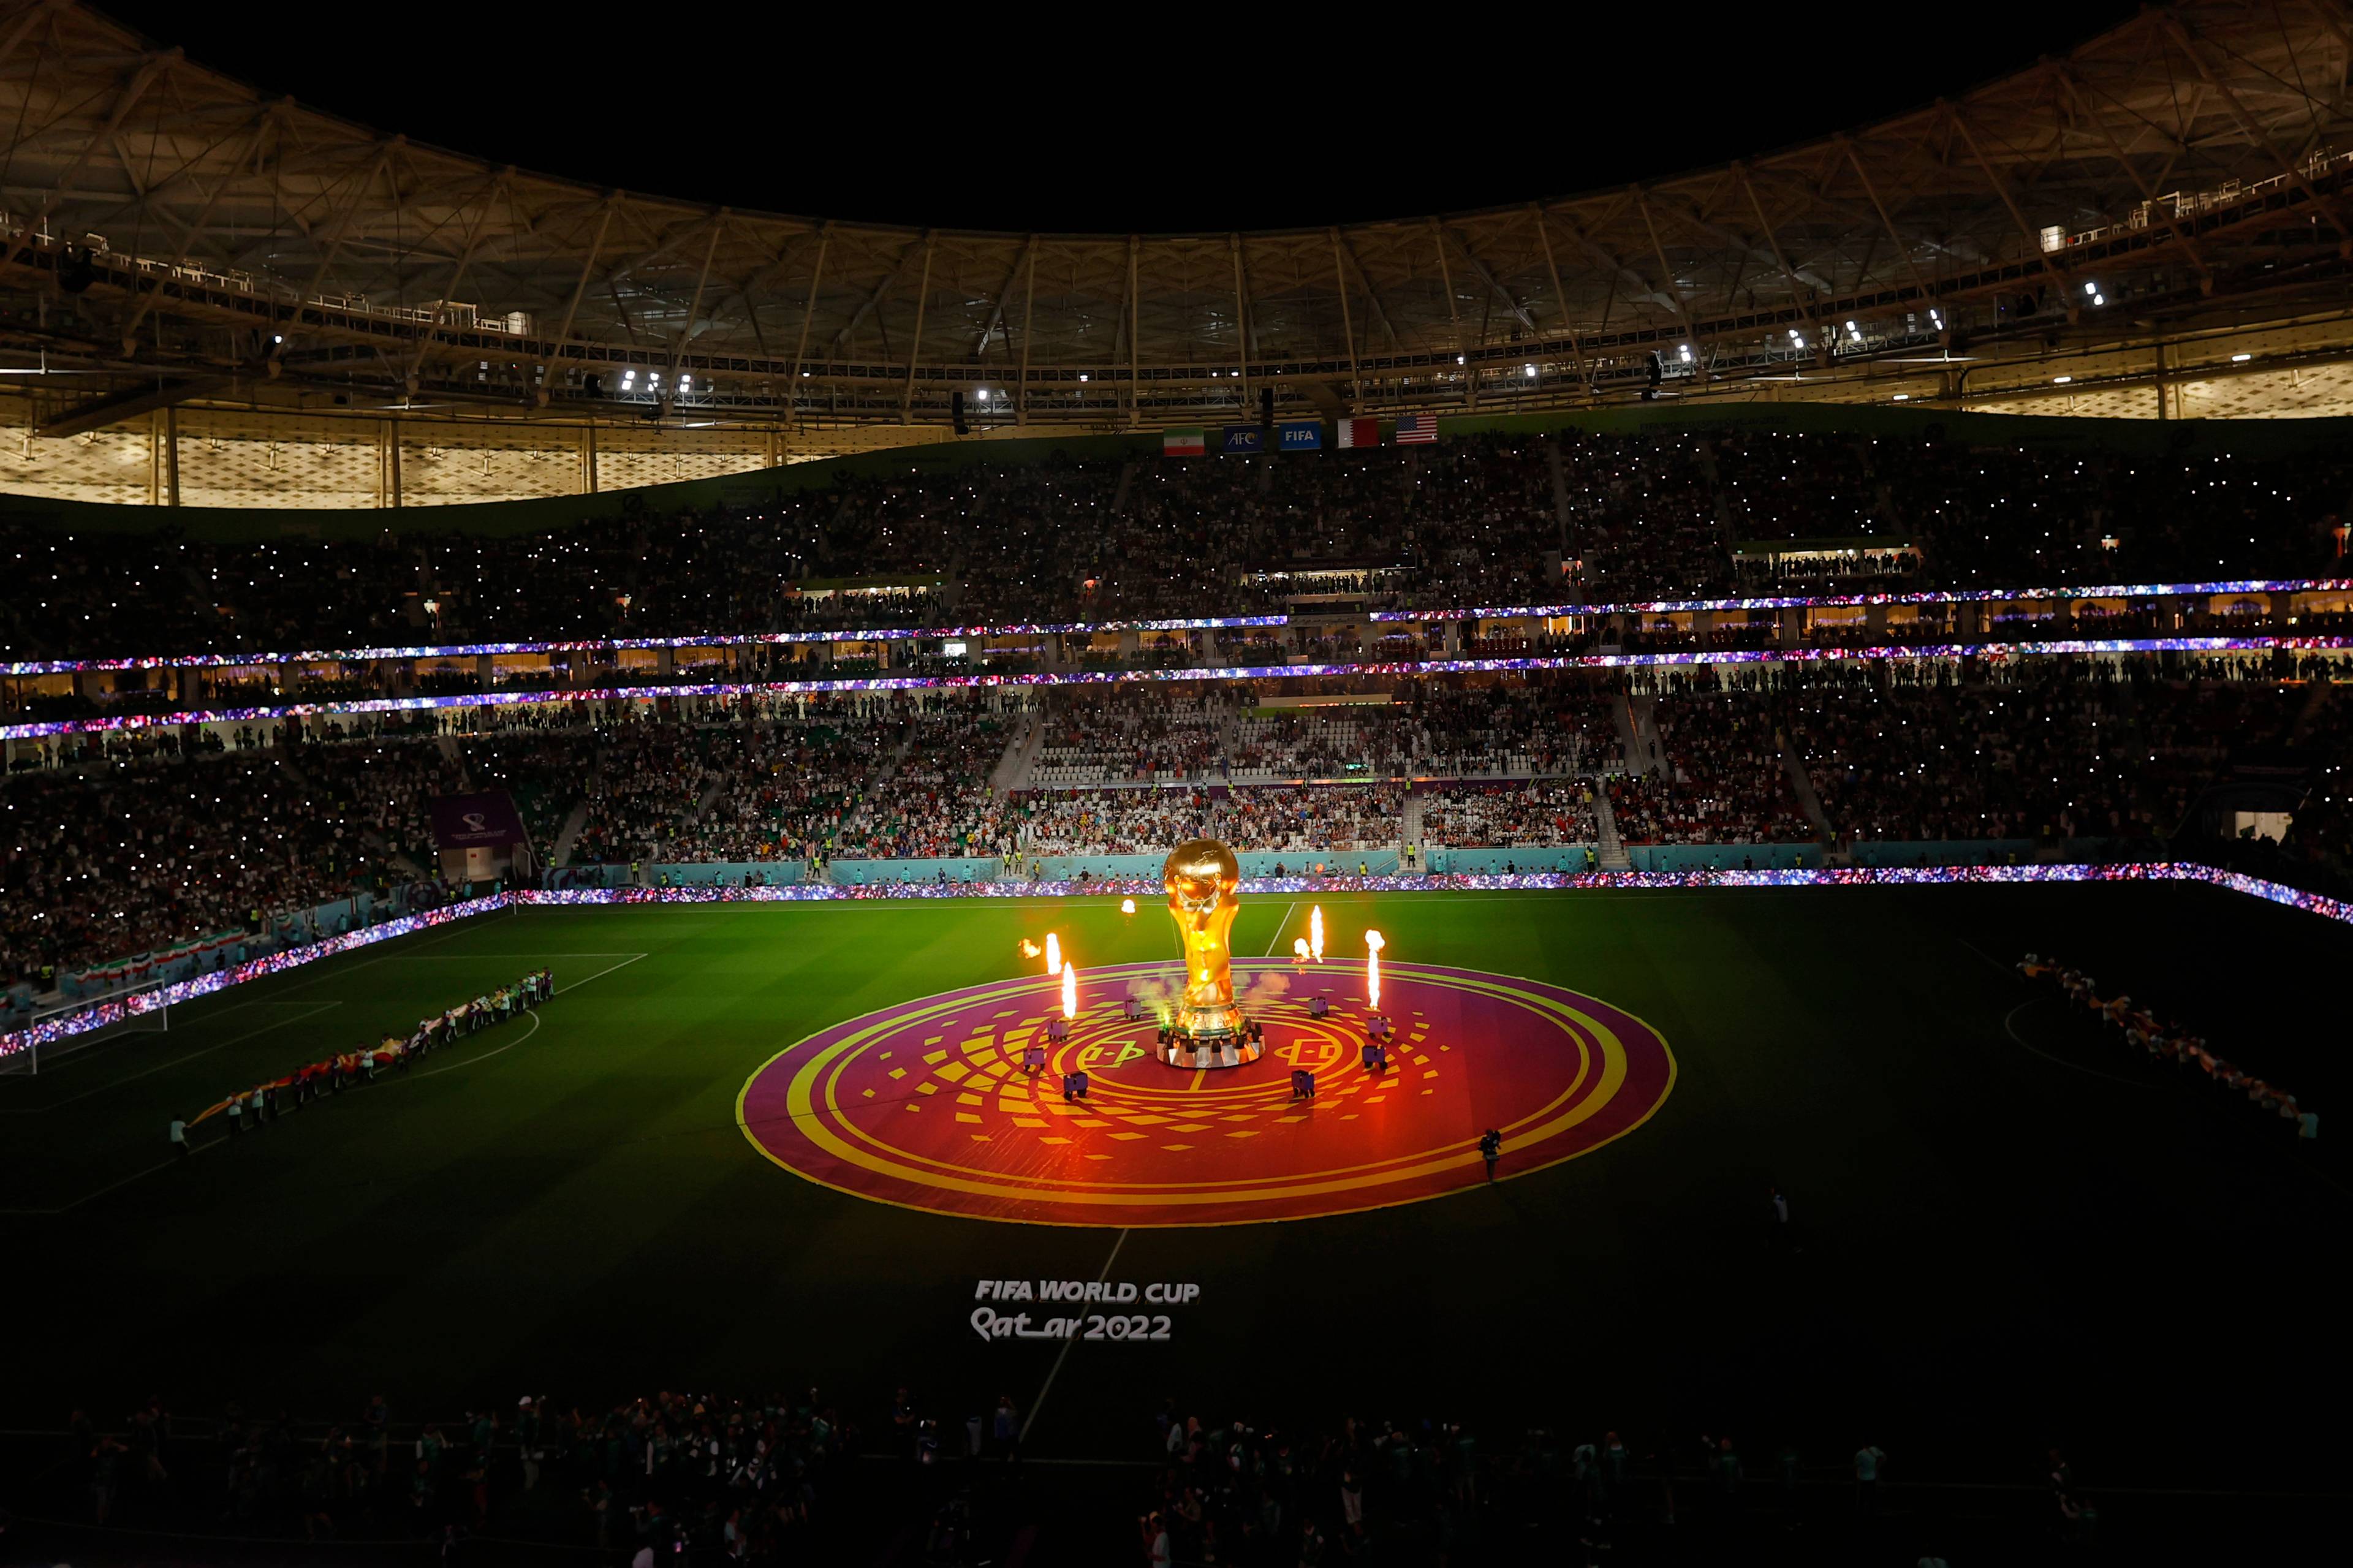 Fireworks go off around a replica of the World Cup trophy during the Qatar 2022 World Cup Group B football match between Iran and USA at the Al-Thumama Stadium in Doha on November 29, 2022. (Photo by Odd ANDERSEN / AFP)